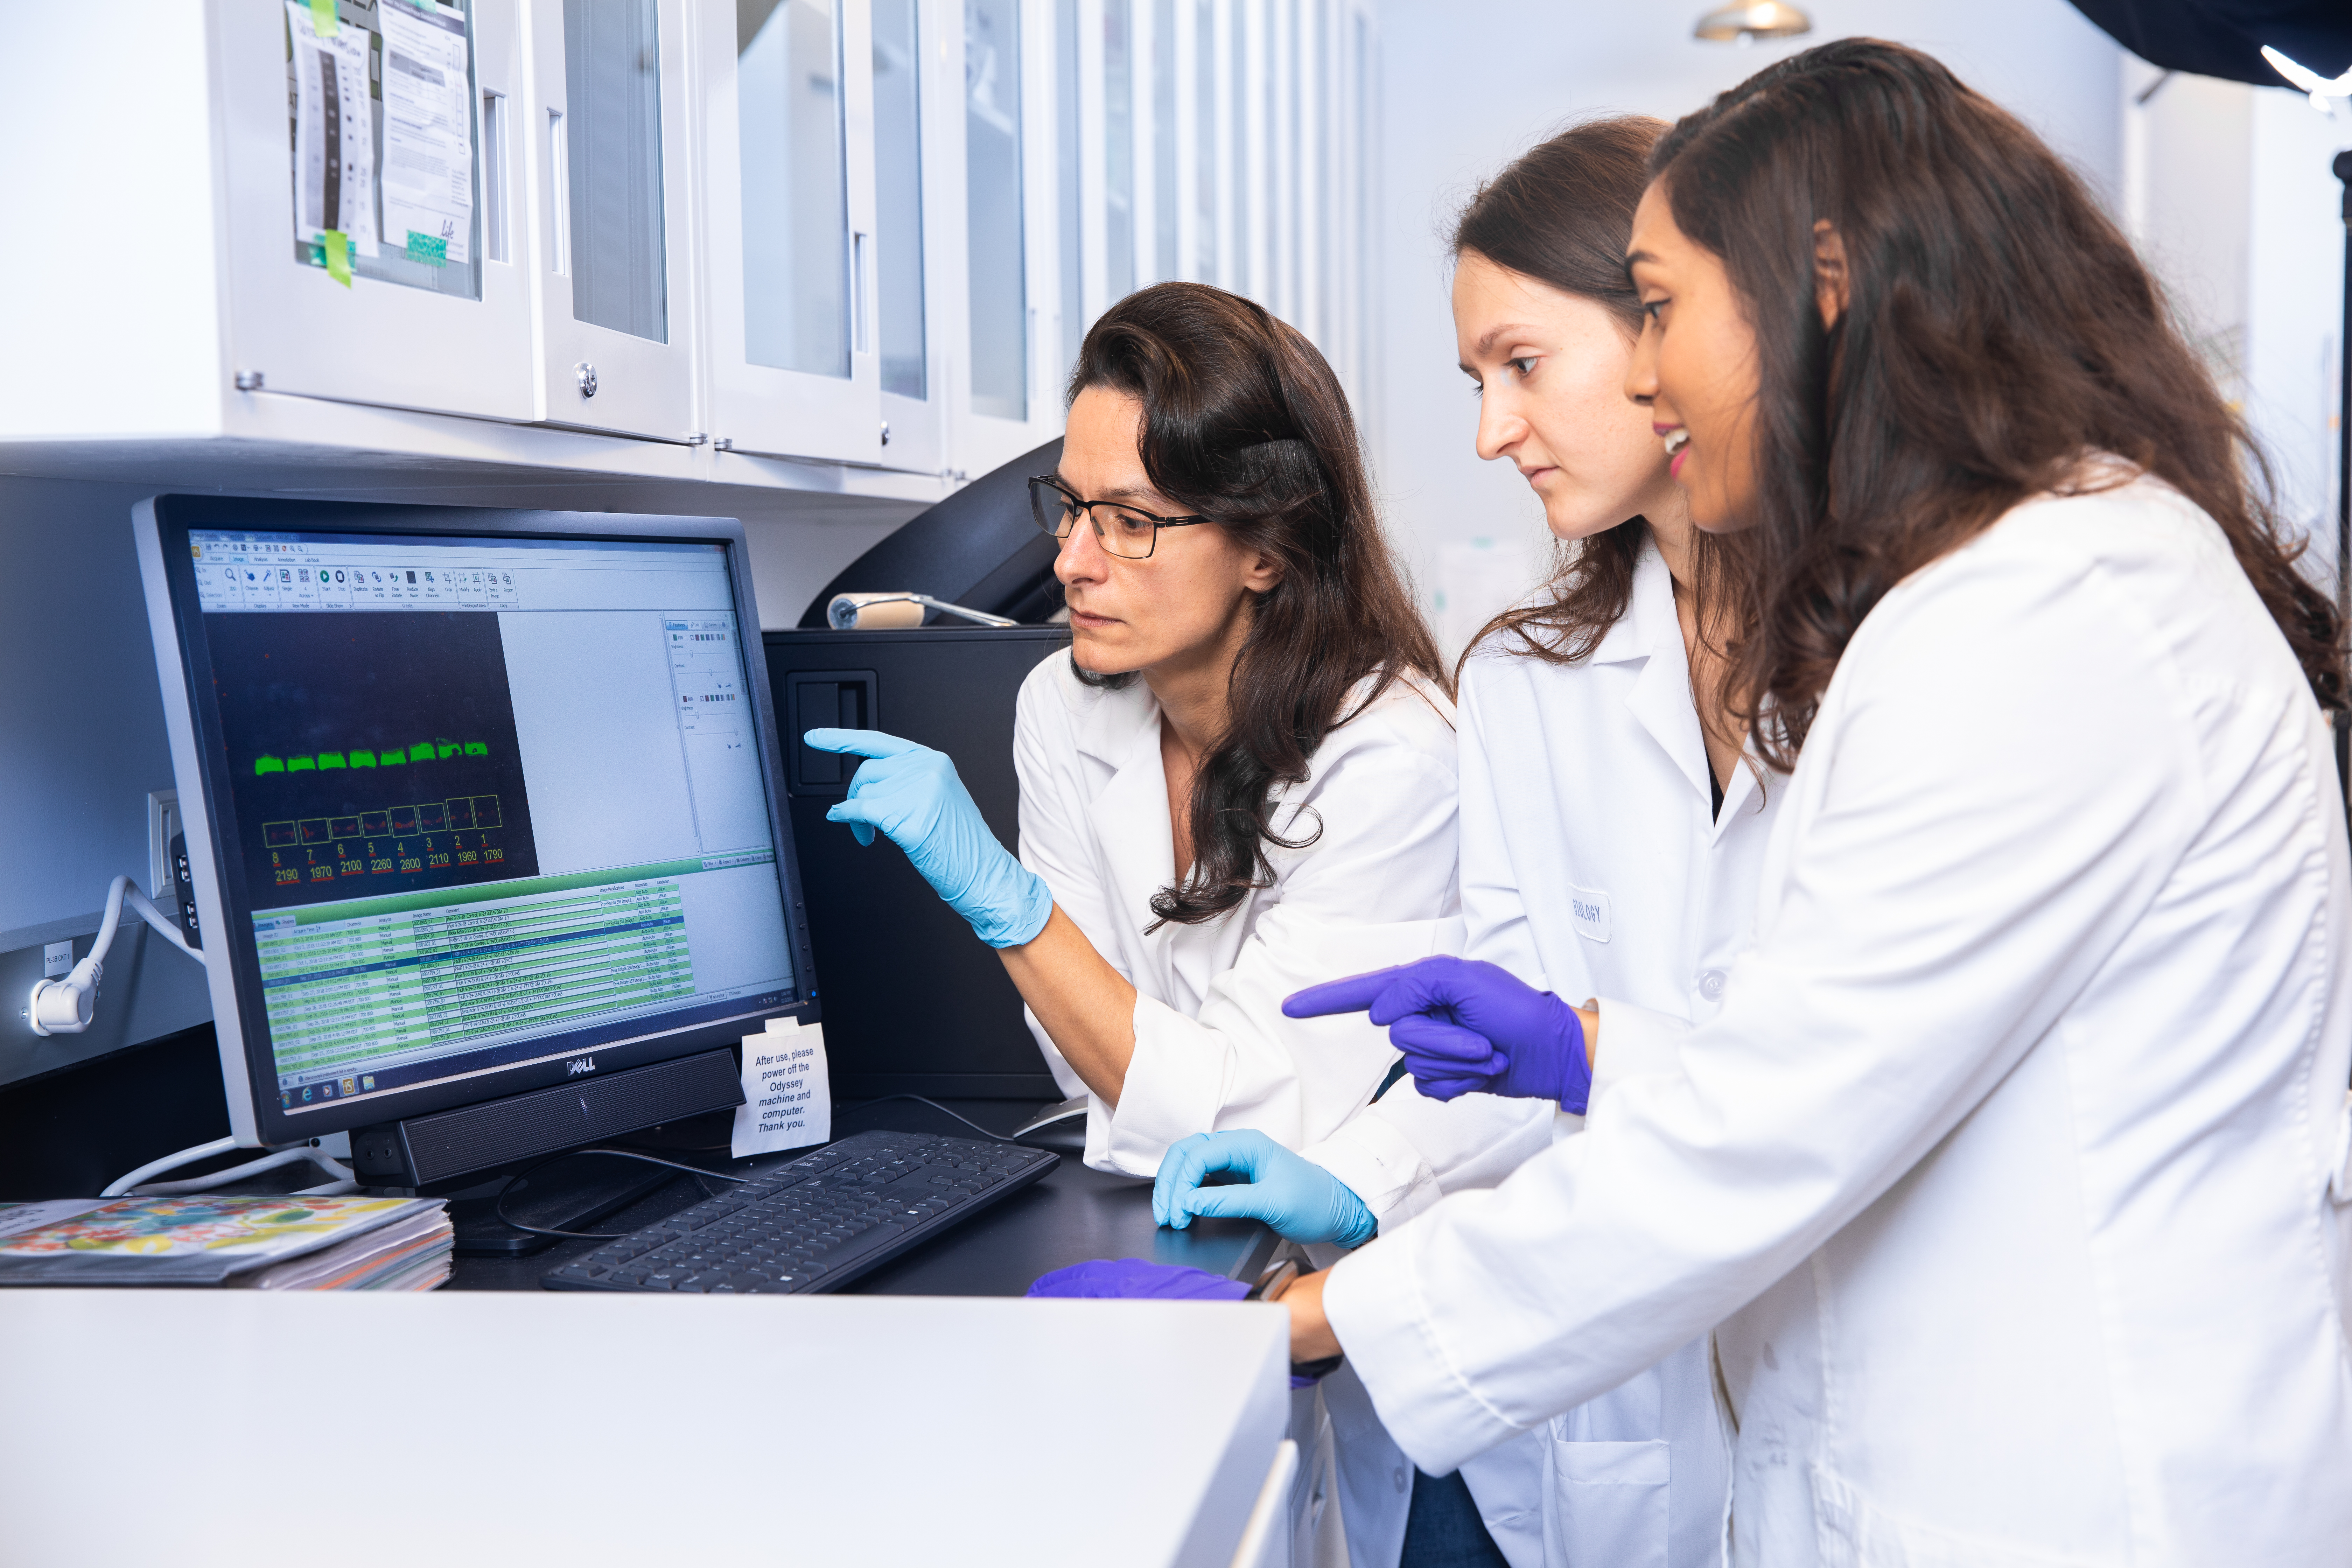 Two female students and female professor wearing white coats in a laboratory looking at a computer monitor.